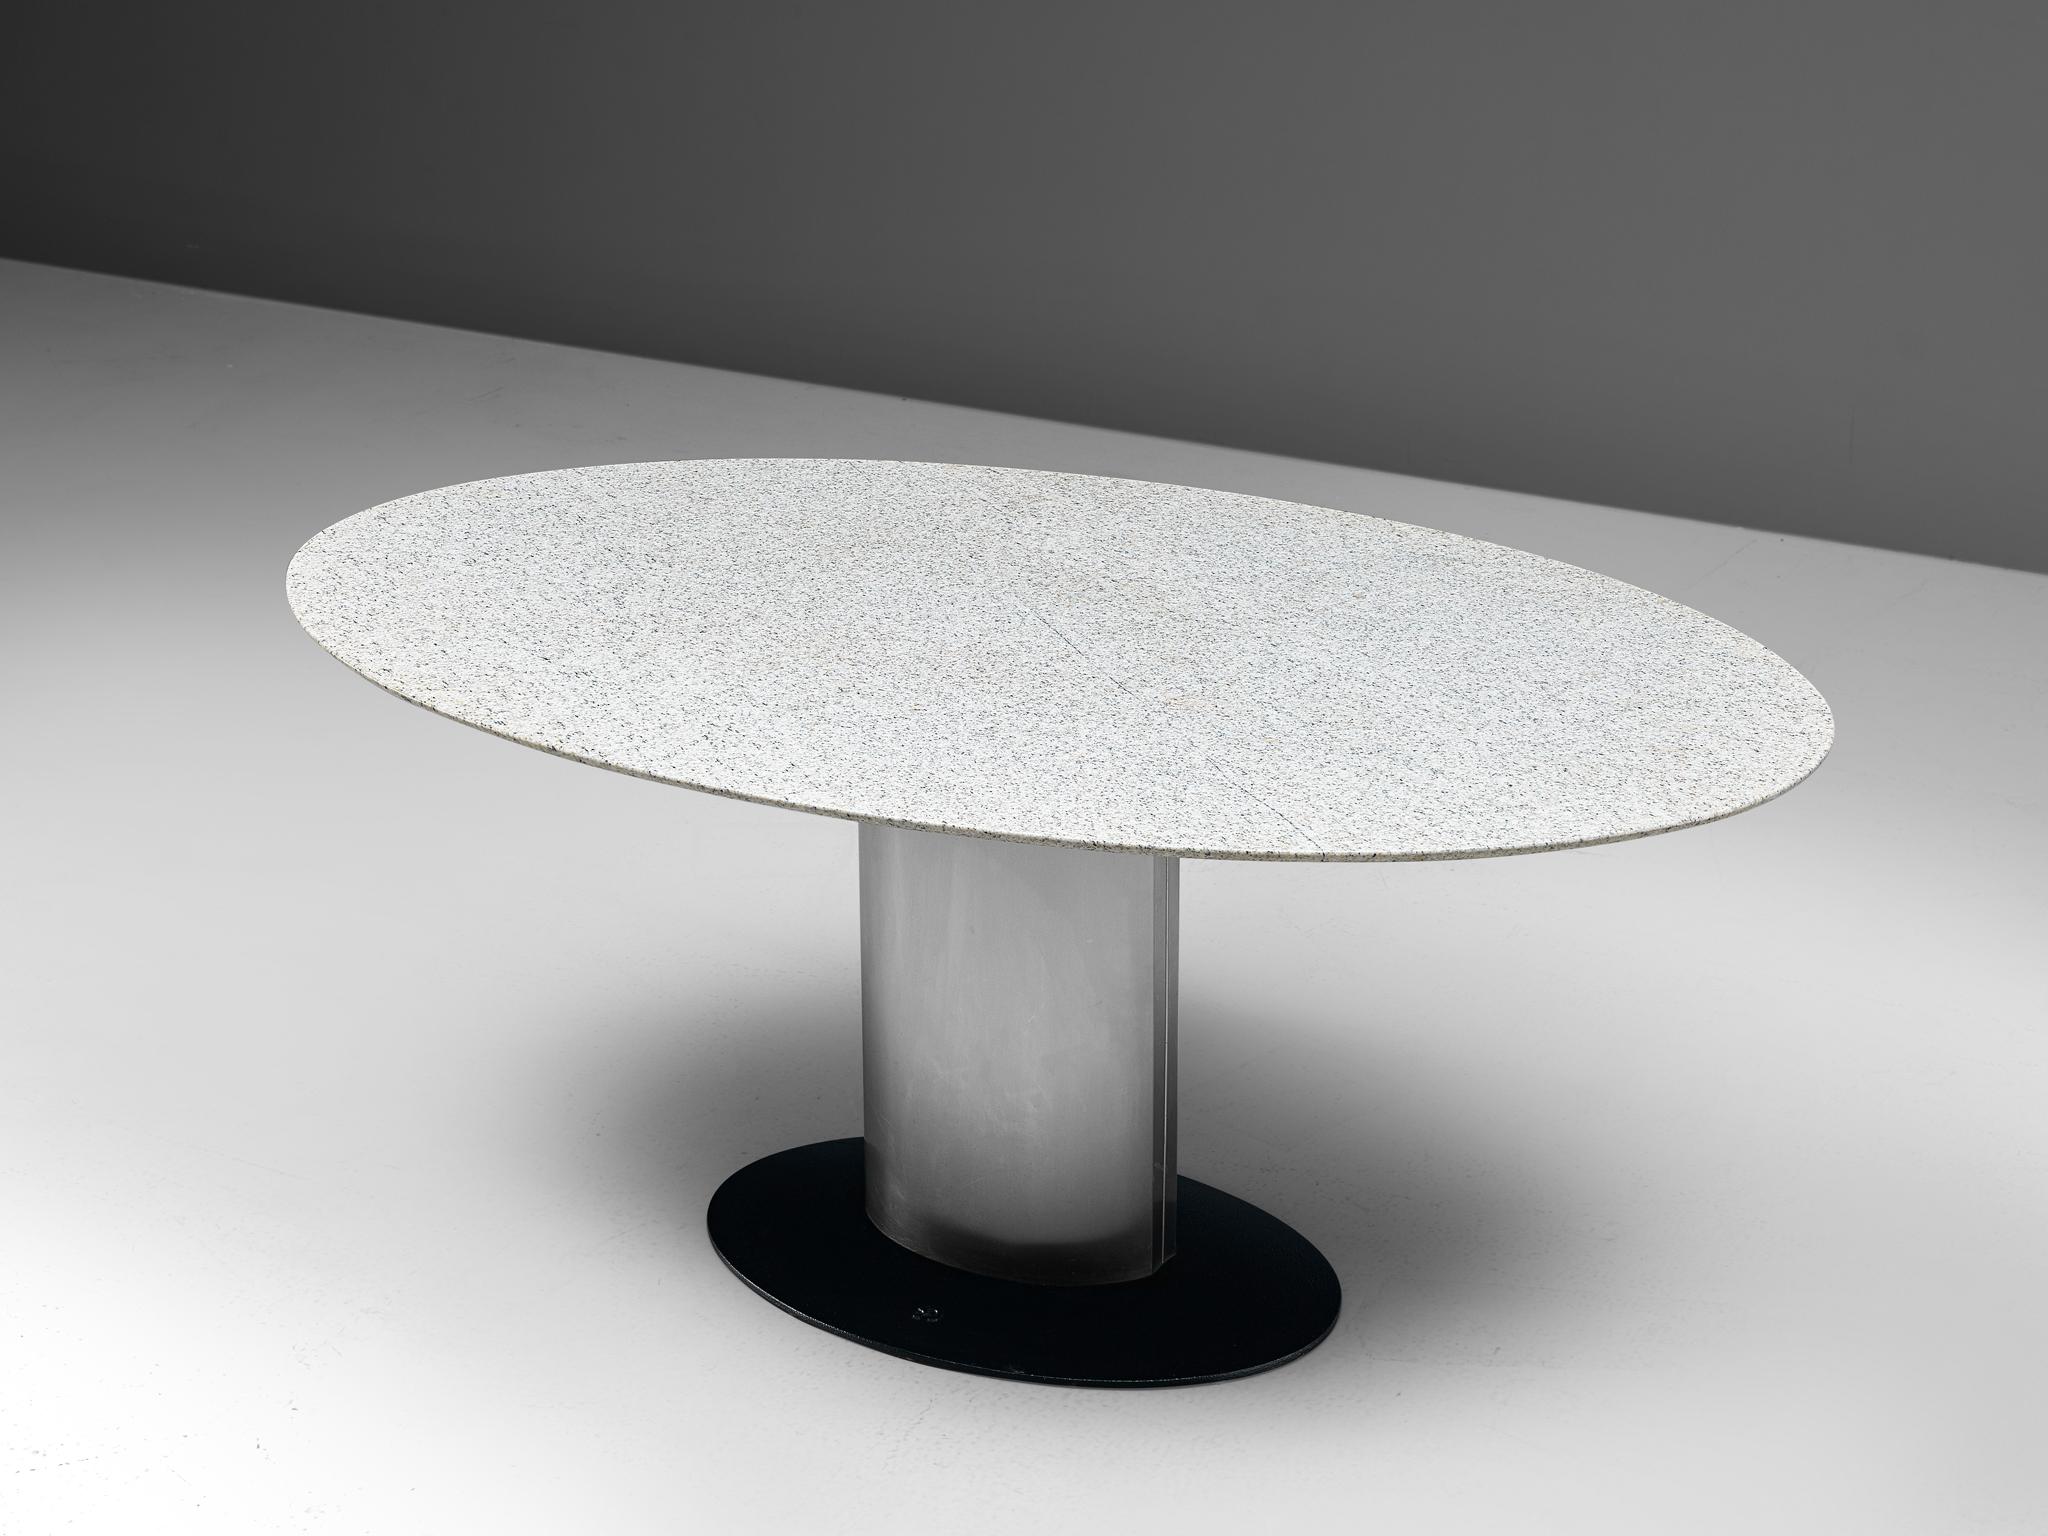 Pedestal table, white granite, metal, coated metal, Germany, 1970s

The oval shaped marble top of this table is a striking combination with its stainless steel pedestal base. The black lacquered foot following the metal base creates a light and